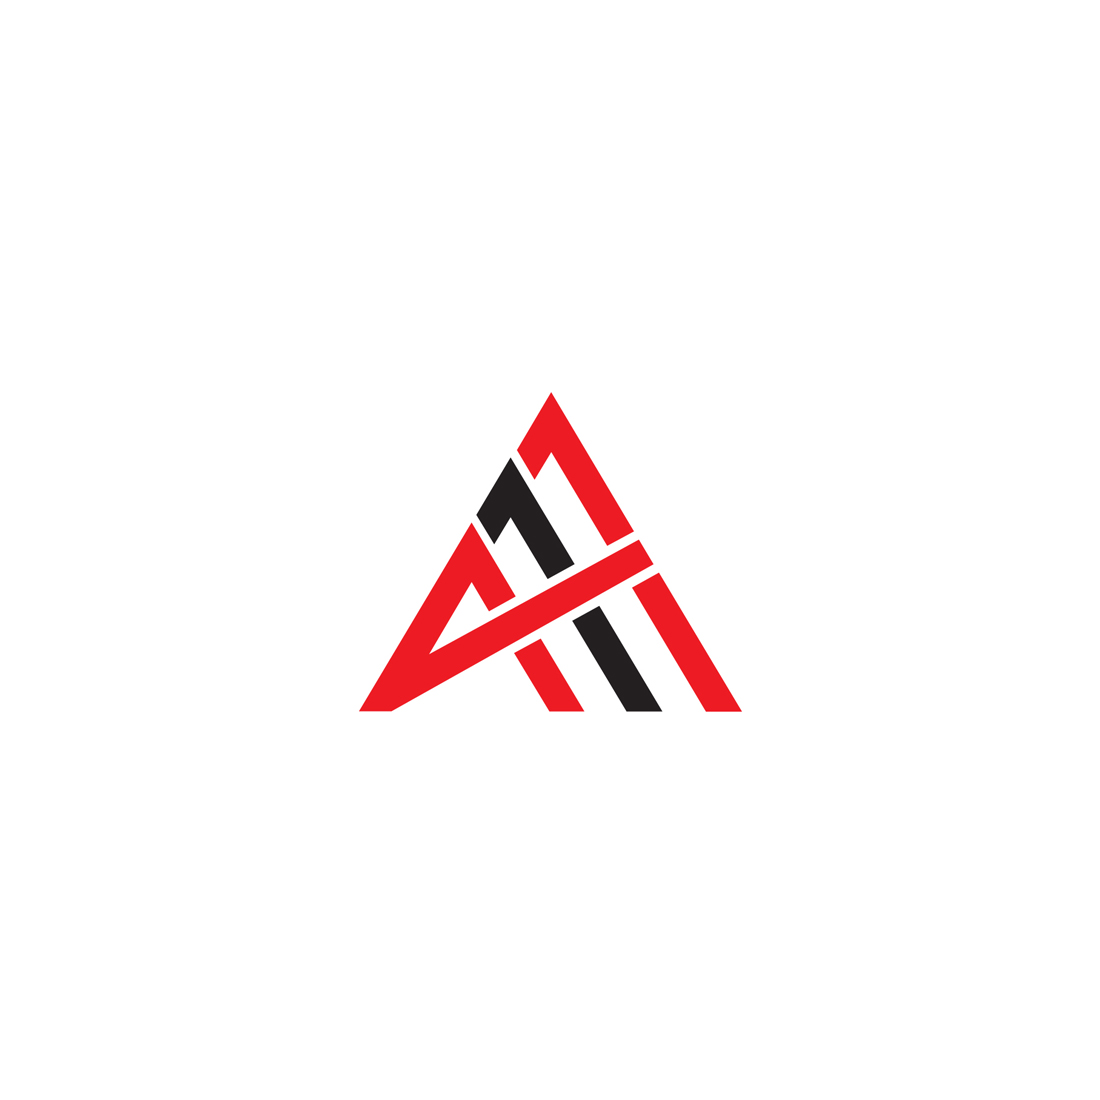 Red and black triangle logo on a white background.